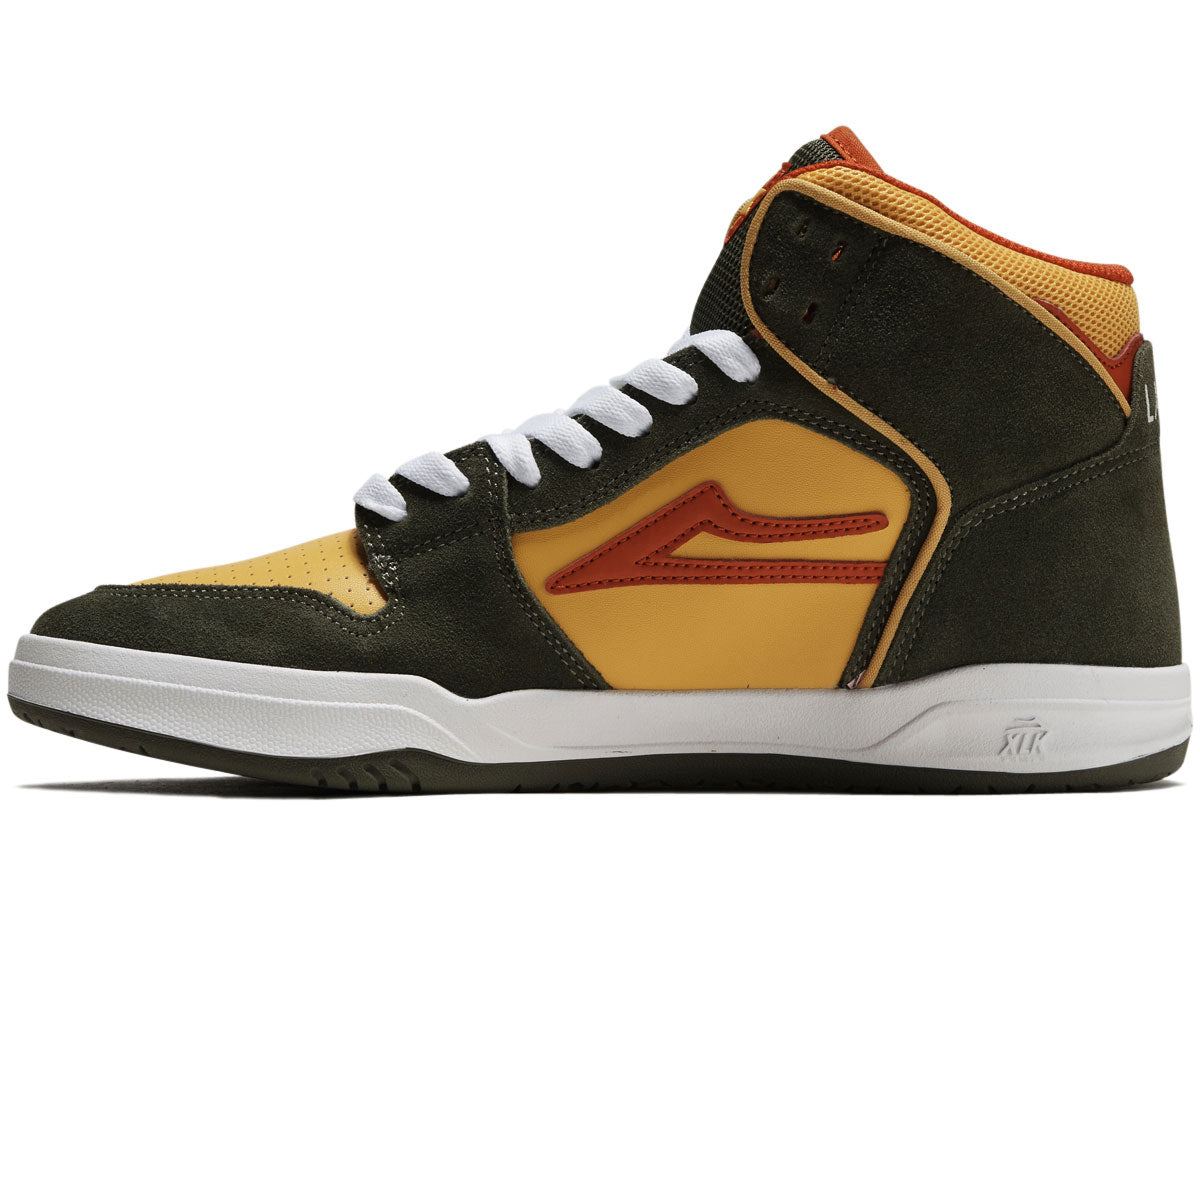 Lakai Telford Shoes - Olive/Yellow Suede image 2